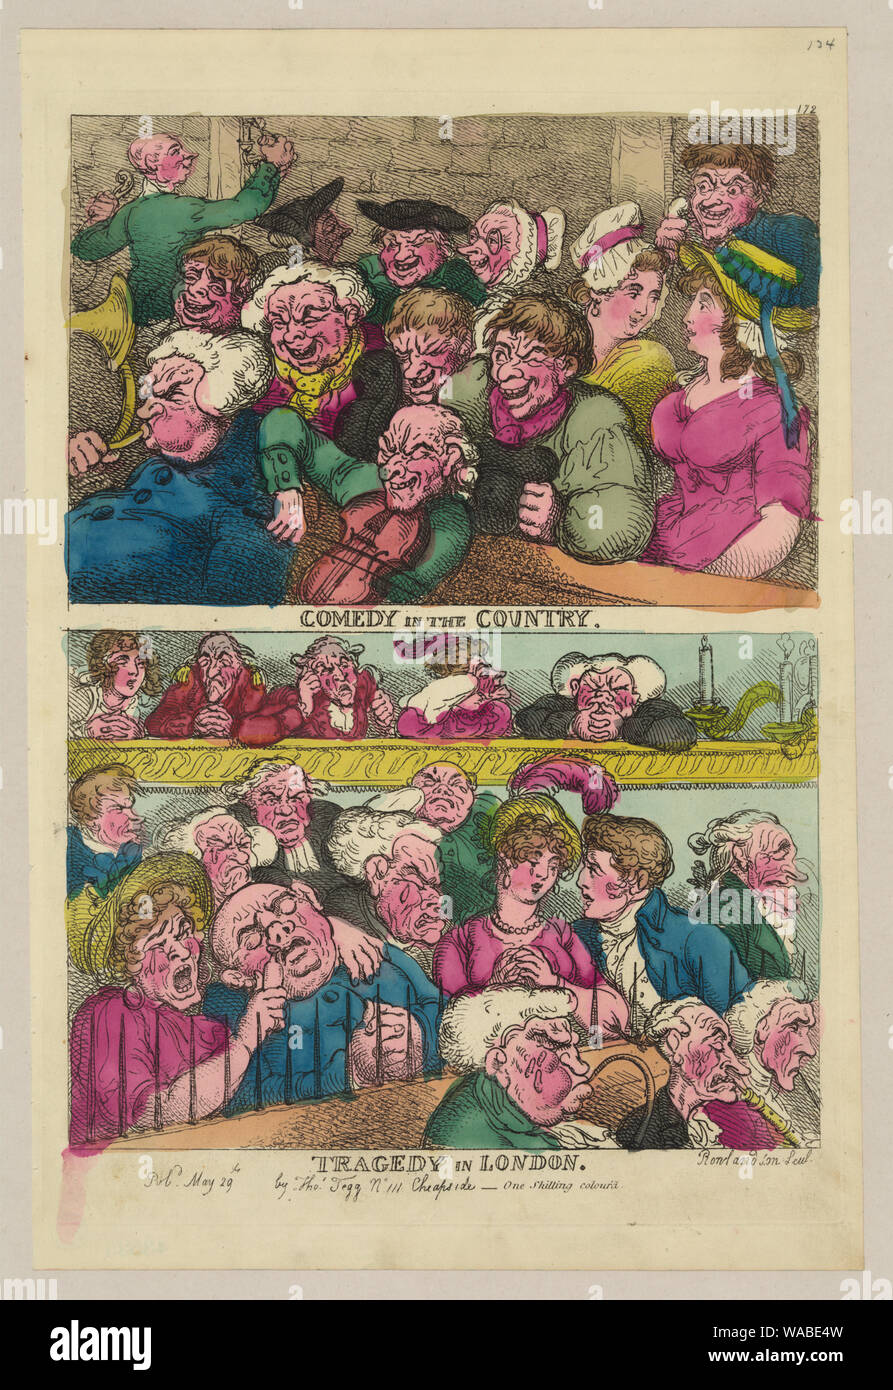 Comedy in the country. Tragedy in London Abstract: Two designs on one plate. Above, two  rows of burlesqued yokels (with two comely women, and an ugly old one), seated behind the orchestra and backed by a rough brick wall...Below, three members of the orchestra play, grotesquely weeping ... (Source: George) Stock Photo